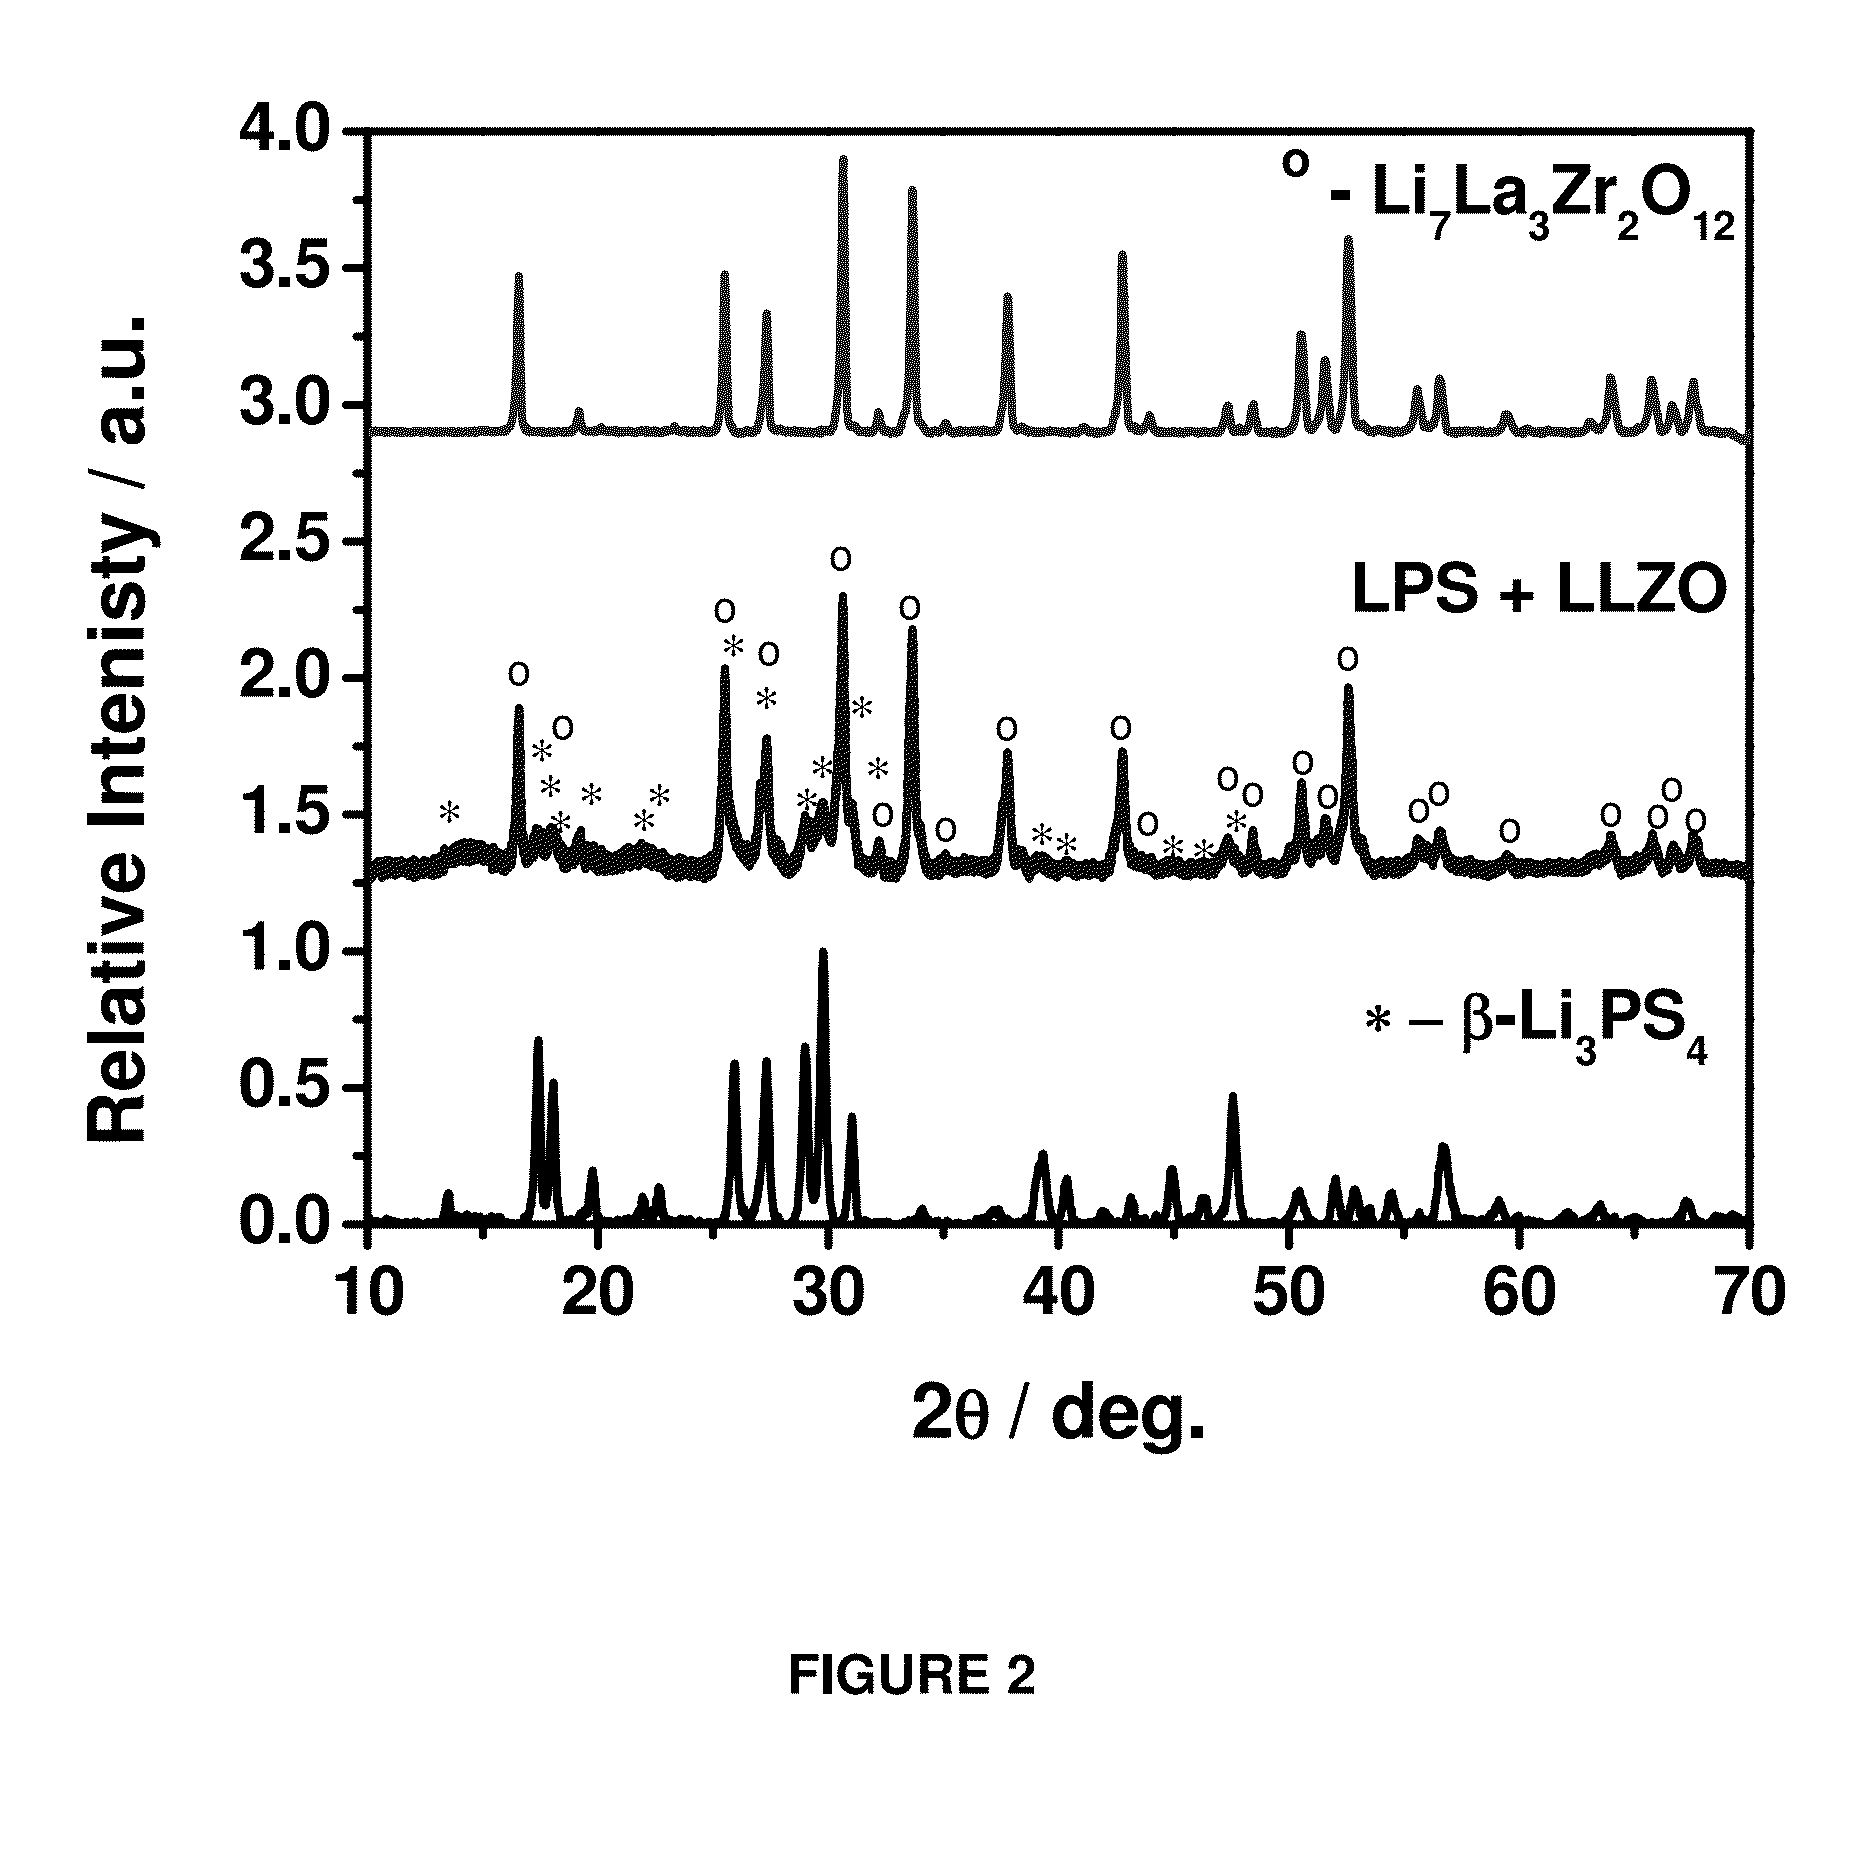 High conducting oxide - sulfide composite lithium superionic conductor